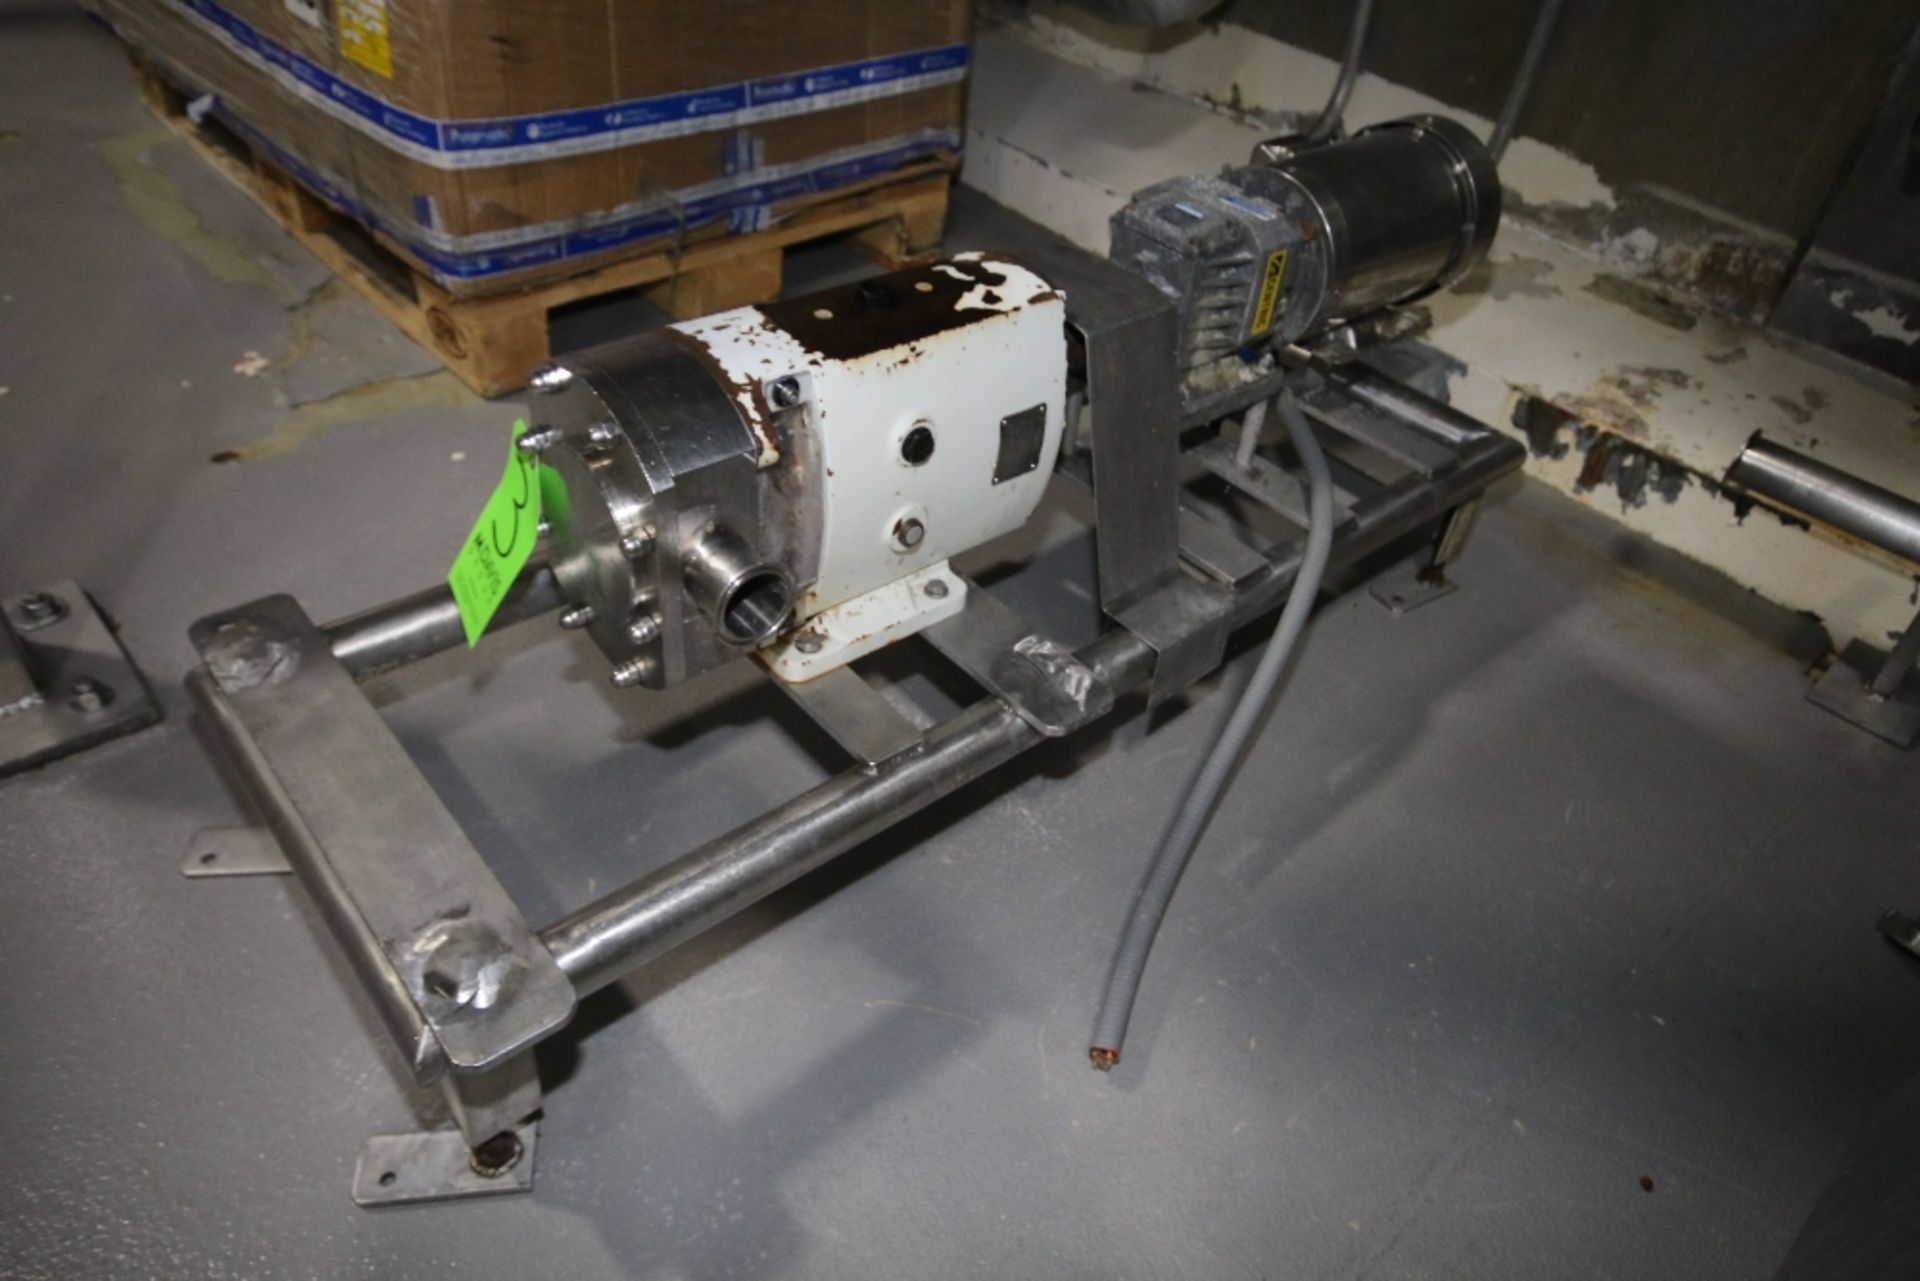 2012 Alfa Laval 2/1.5 hp Positive Displacement Pump, Type SRU3/038/LD, S/N 871622,with S/S Clamp - Image 2 of 3